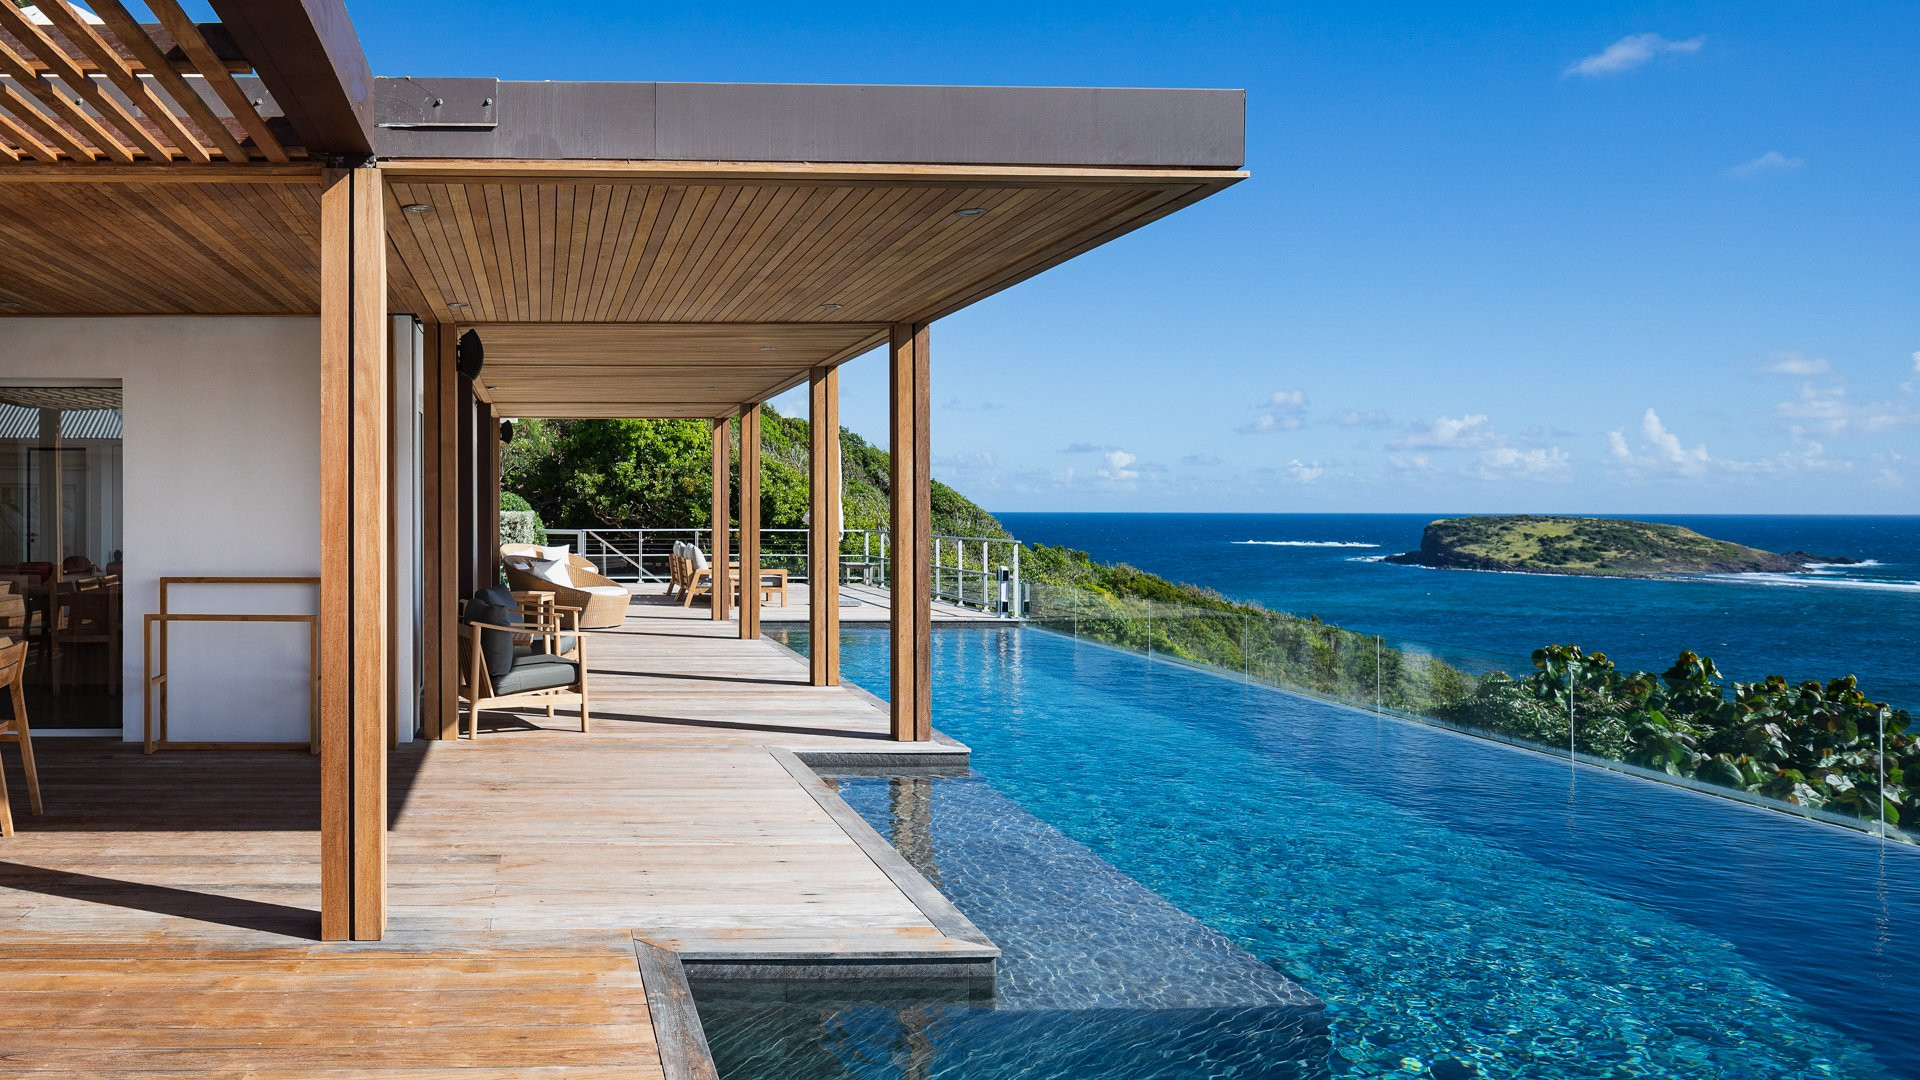 MY VILLA IN ST-BARTHS I Our concierge services